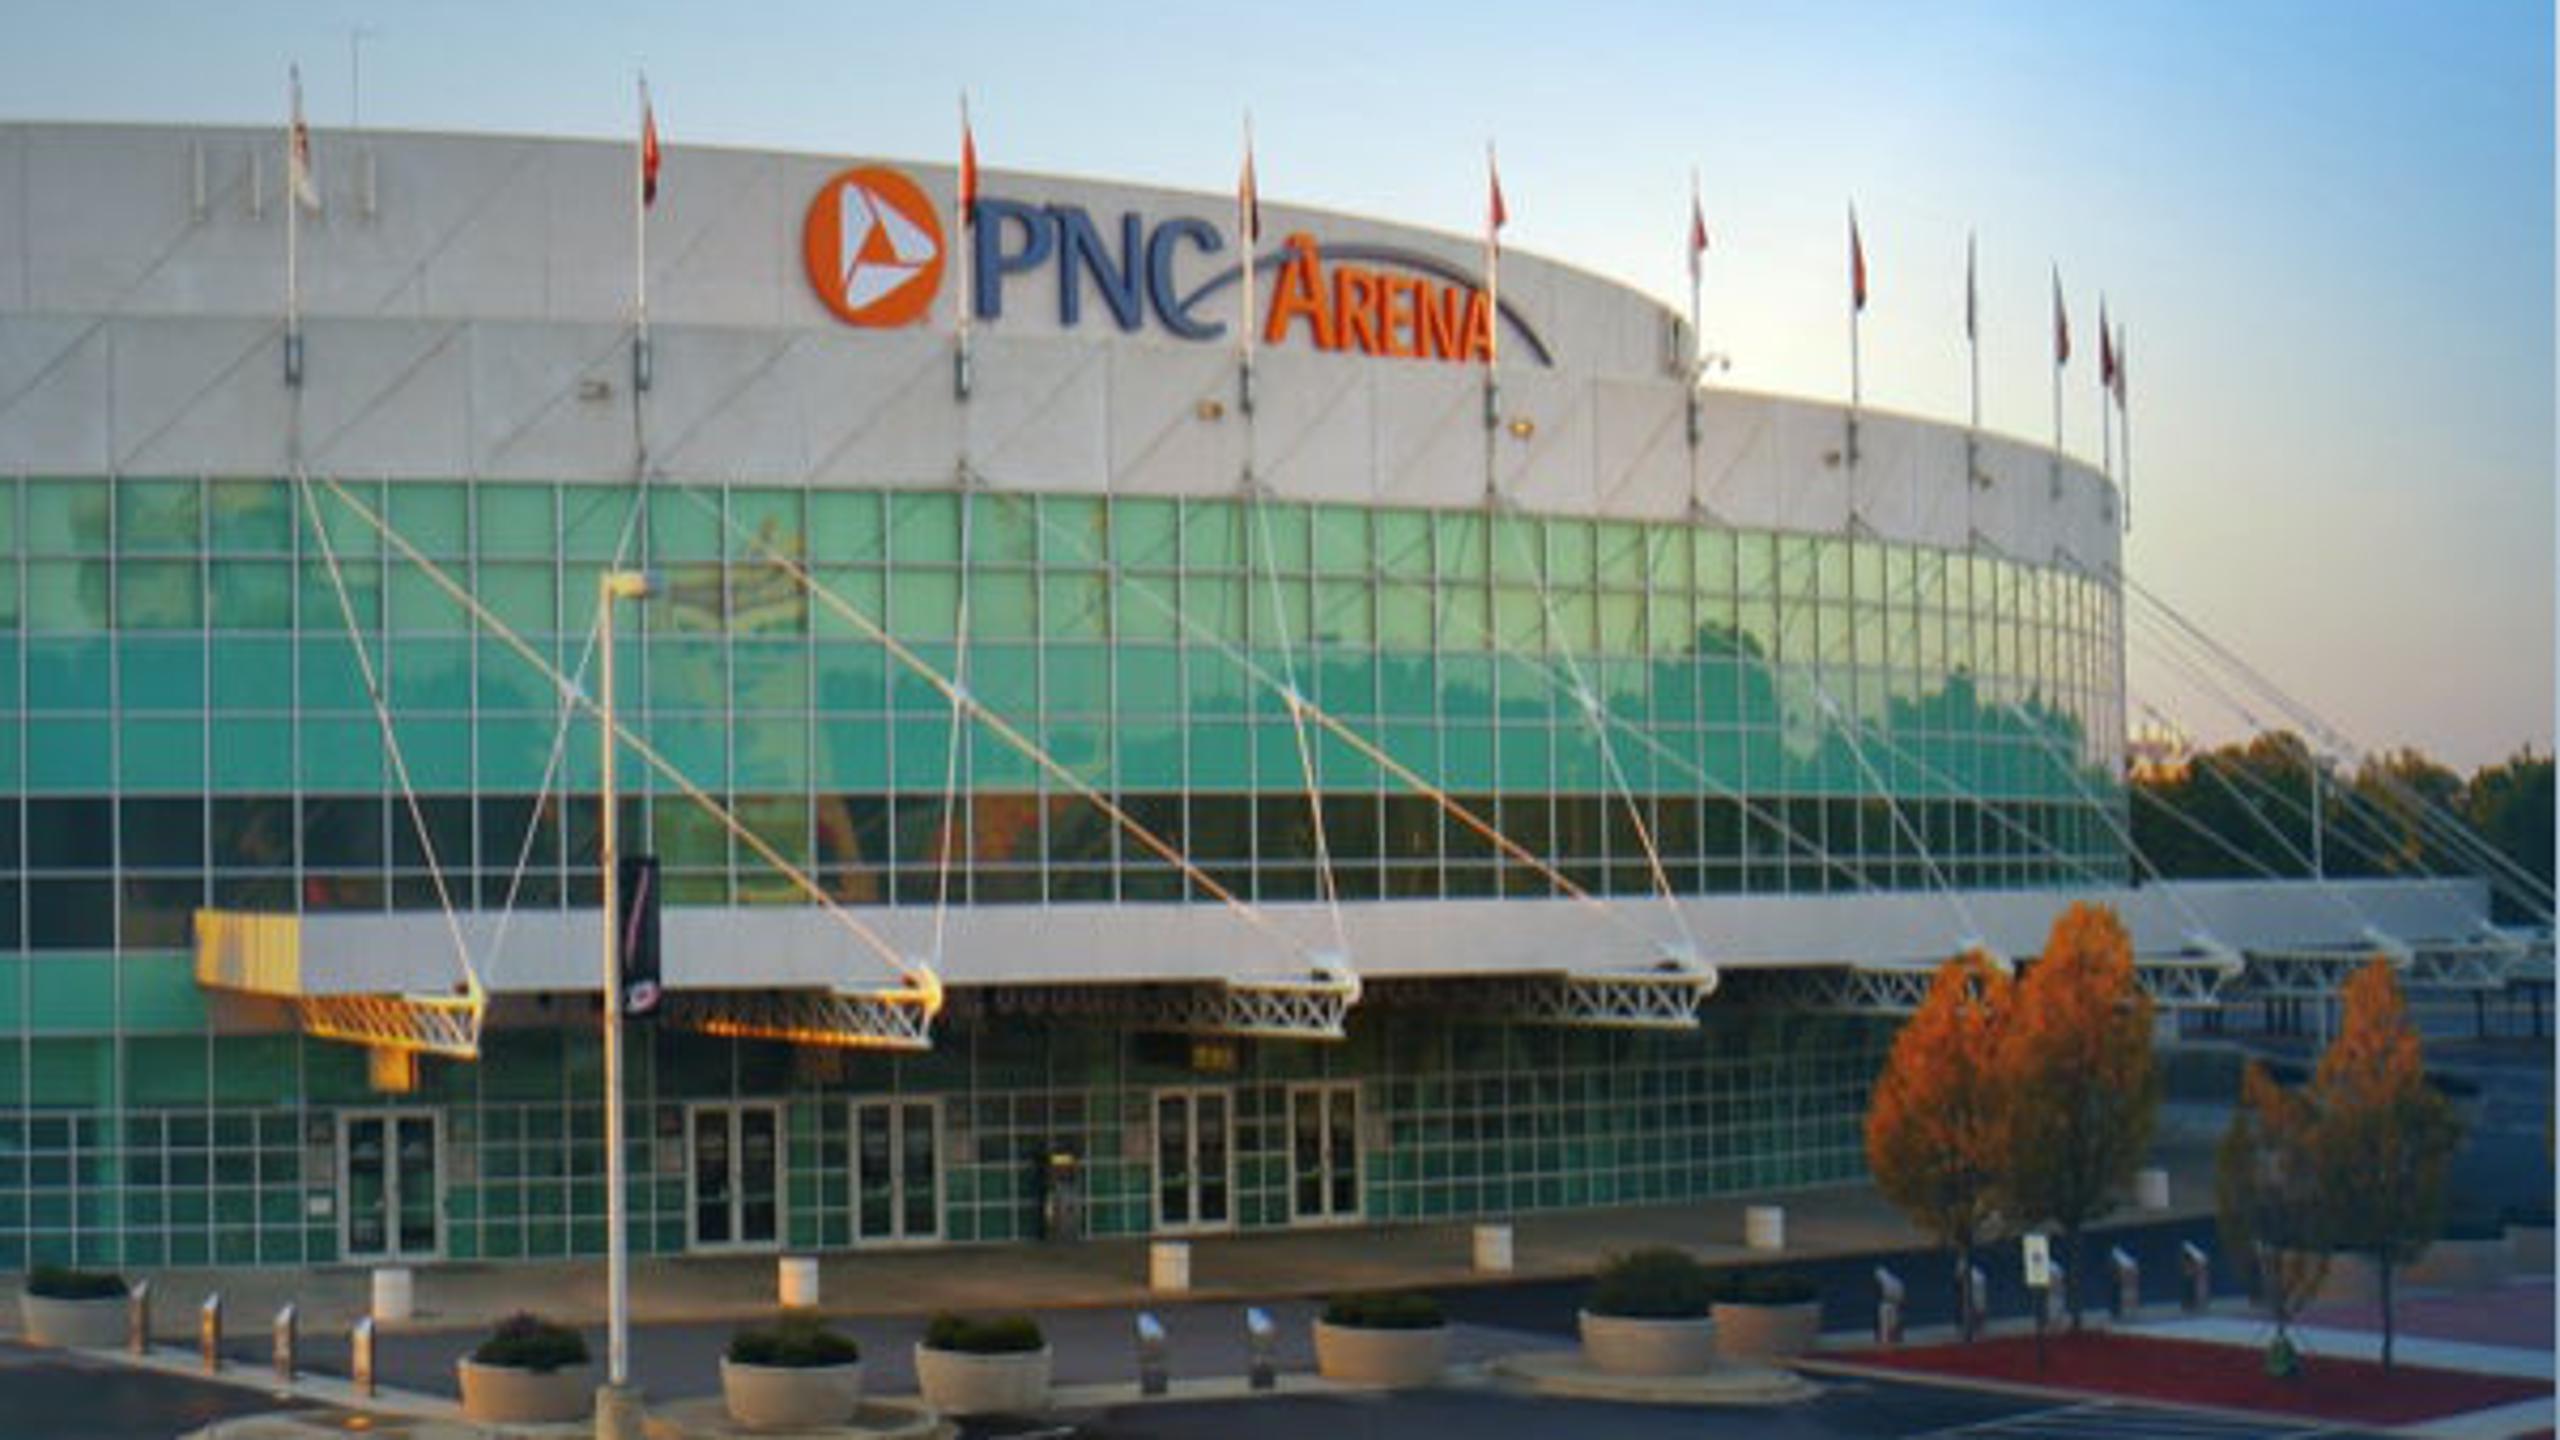 Pnc Arena 1654618896.9693658.2560x1440 